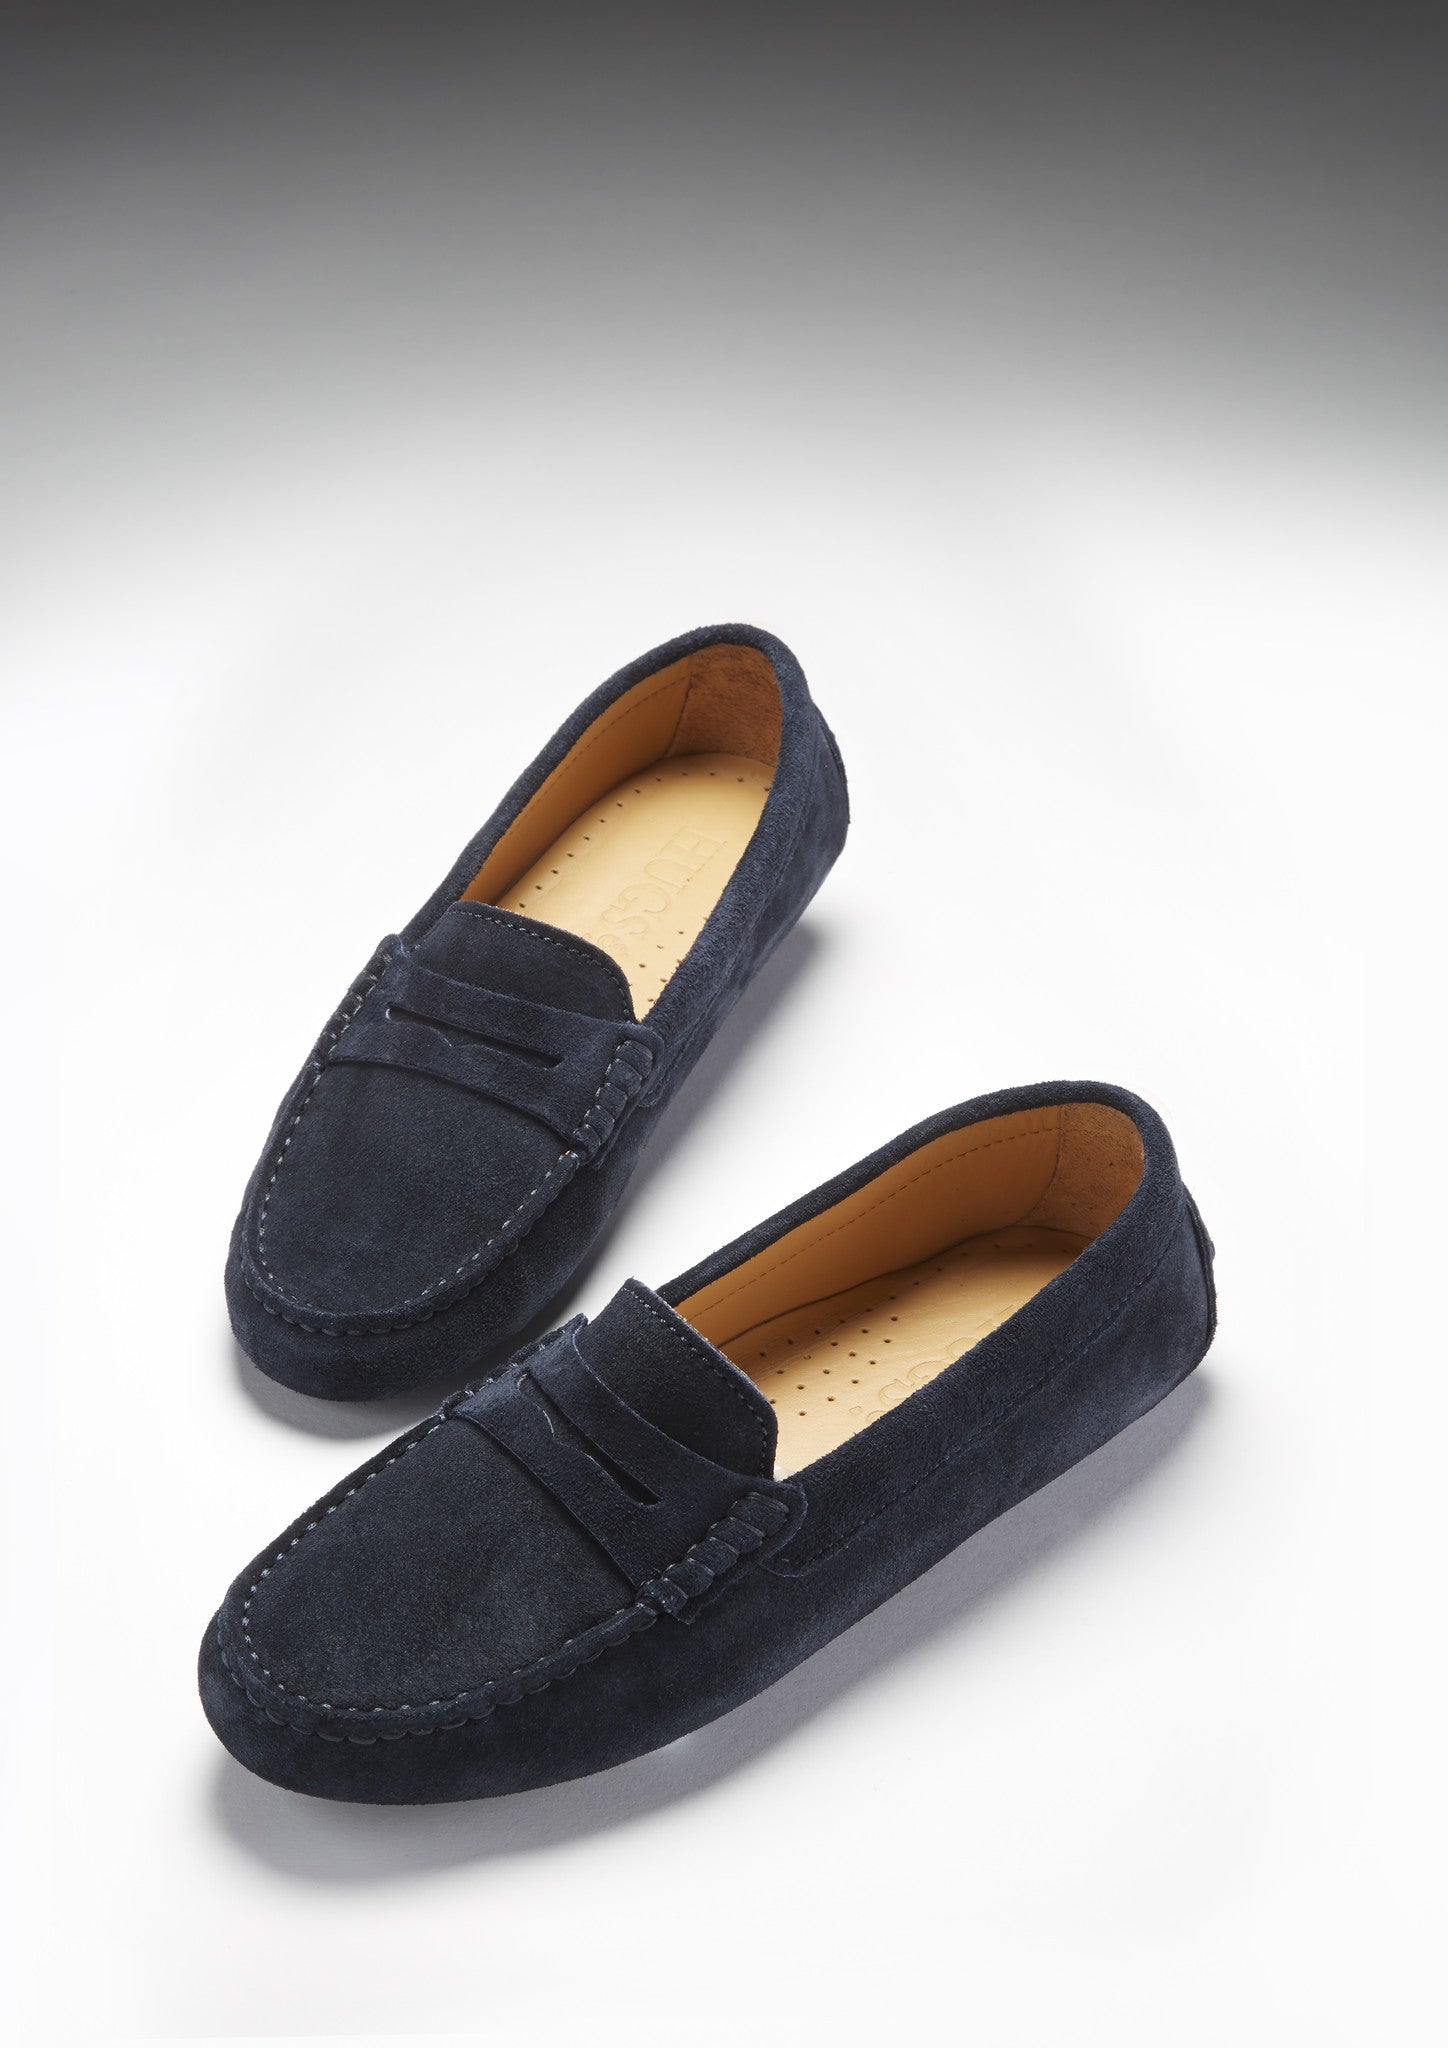 navy blue driving moccasins